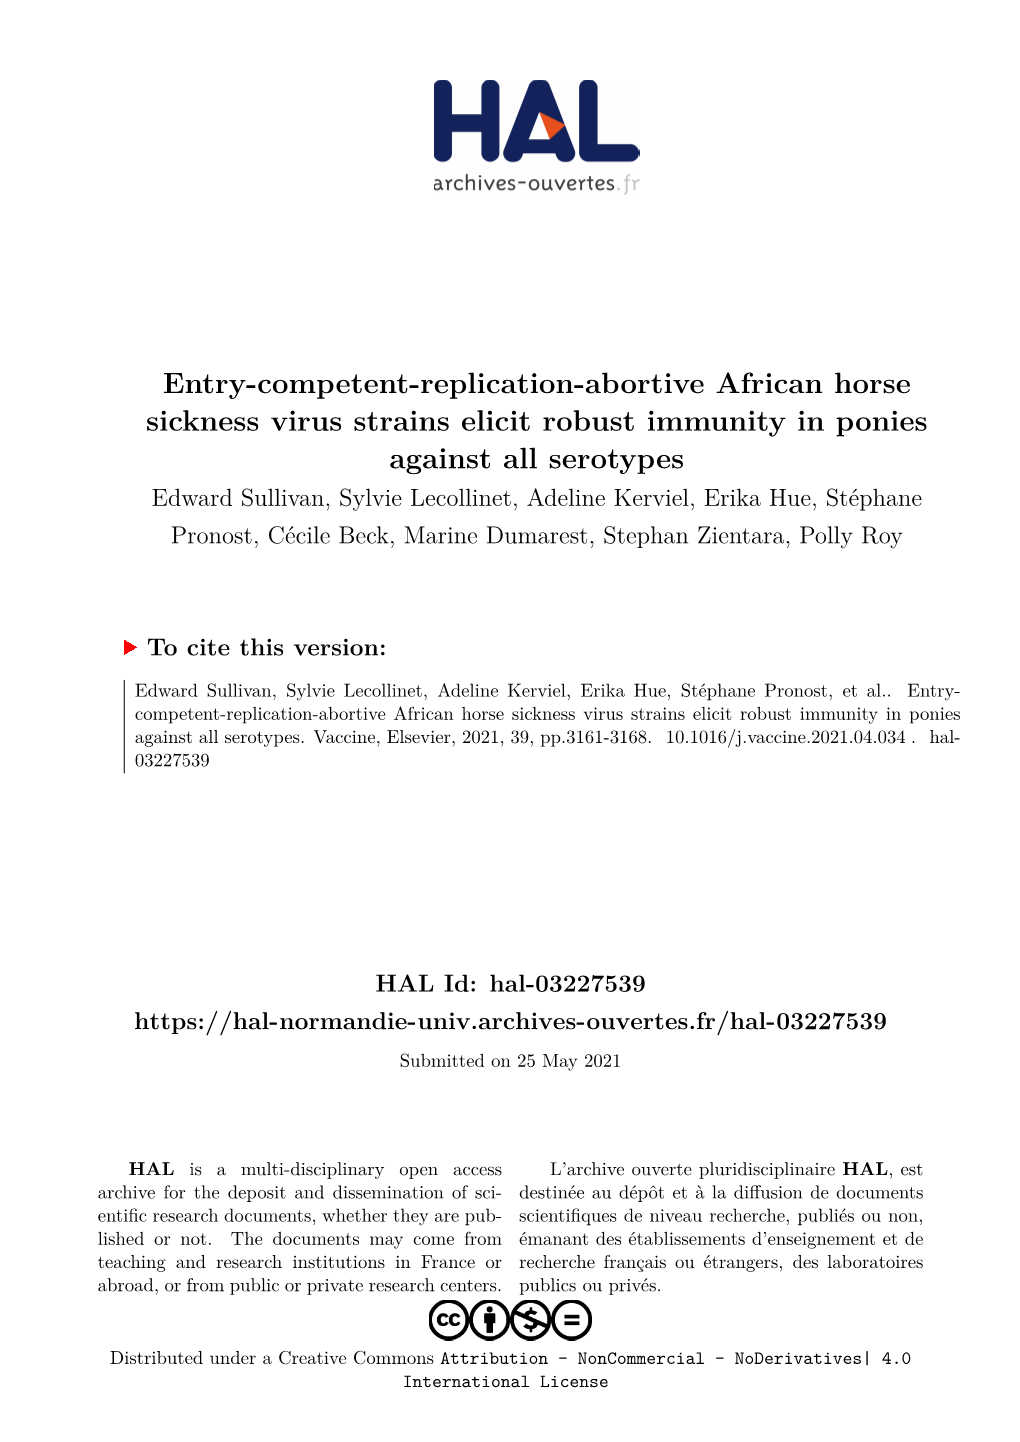 Entry-Competent-Replication-Abortive African Horse Sickness Virus